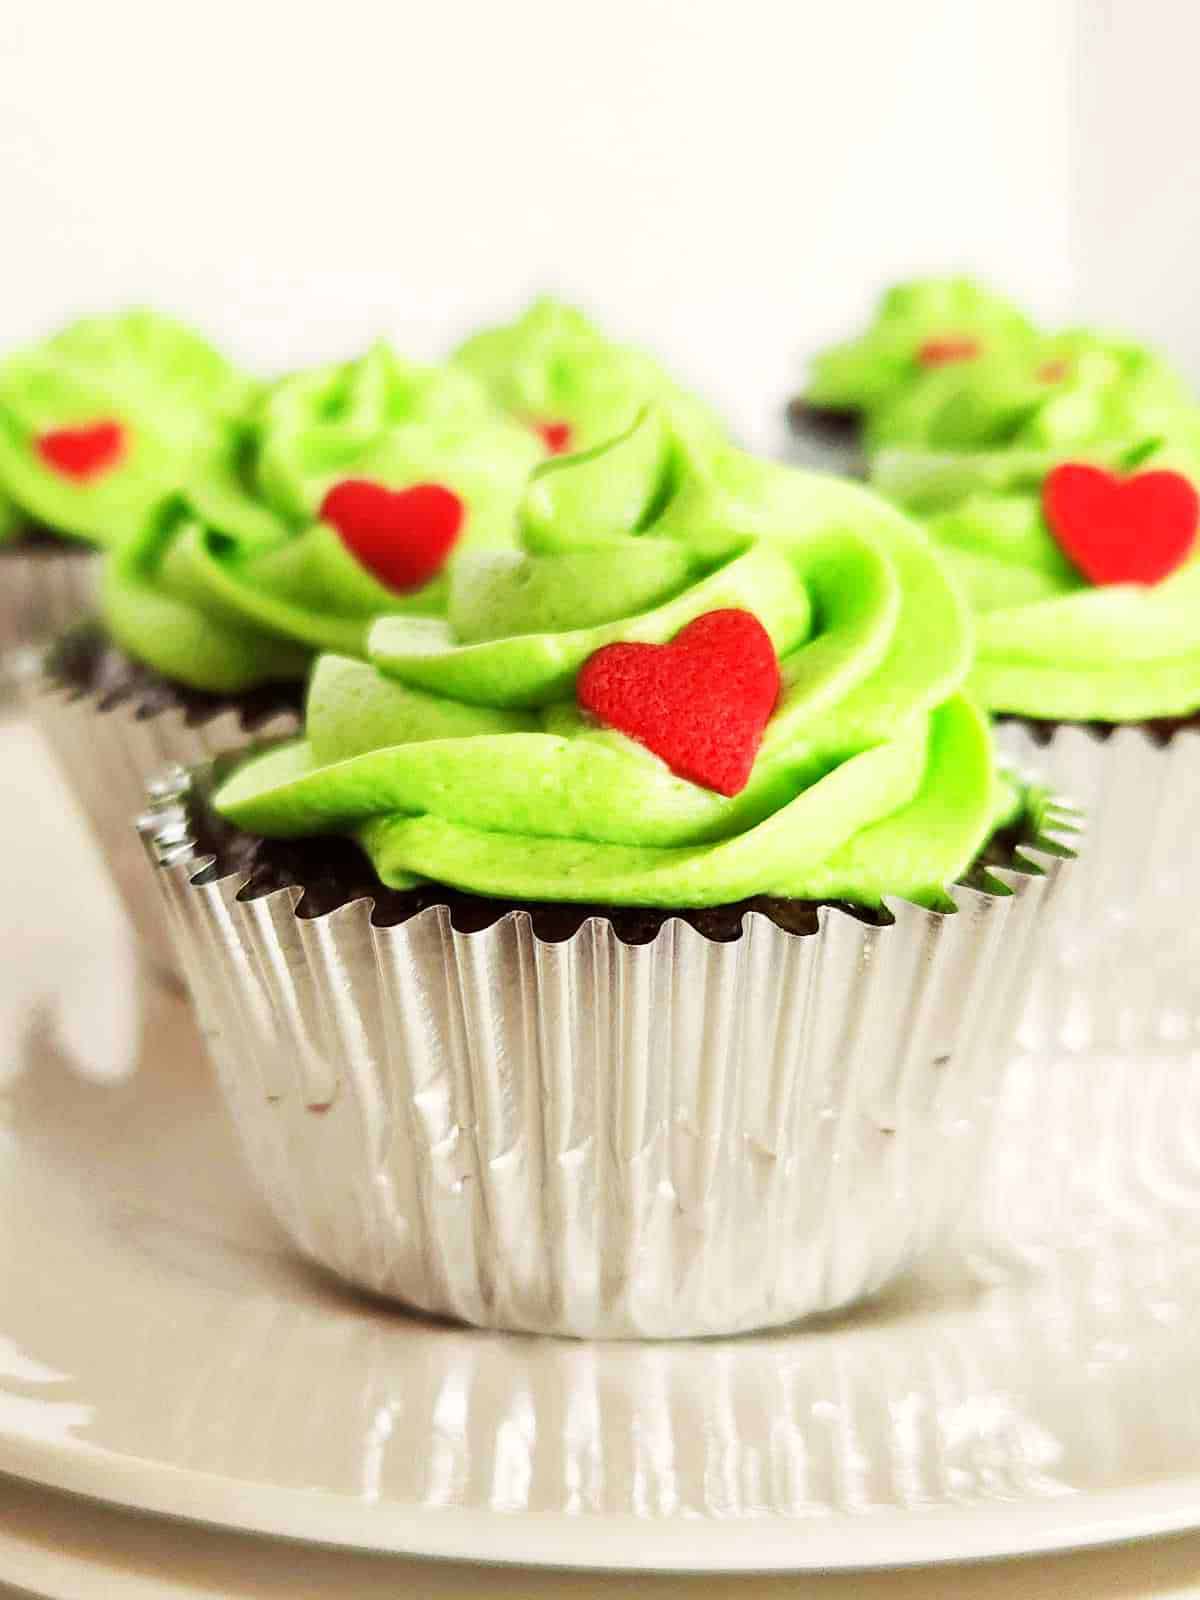 Red candy hearts on green frosting iced cupcakes.